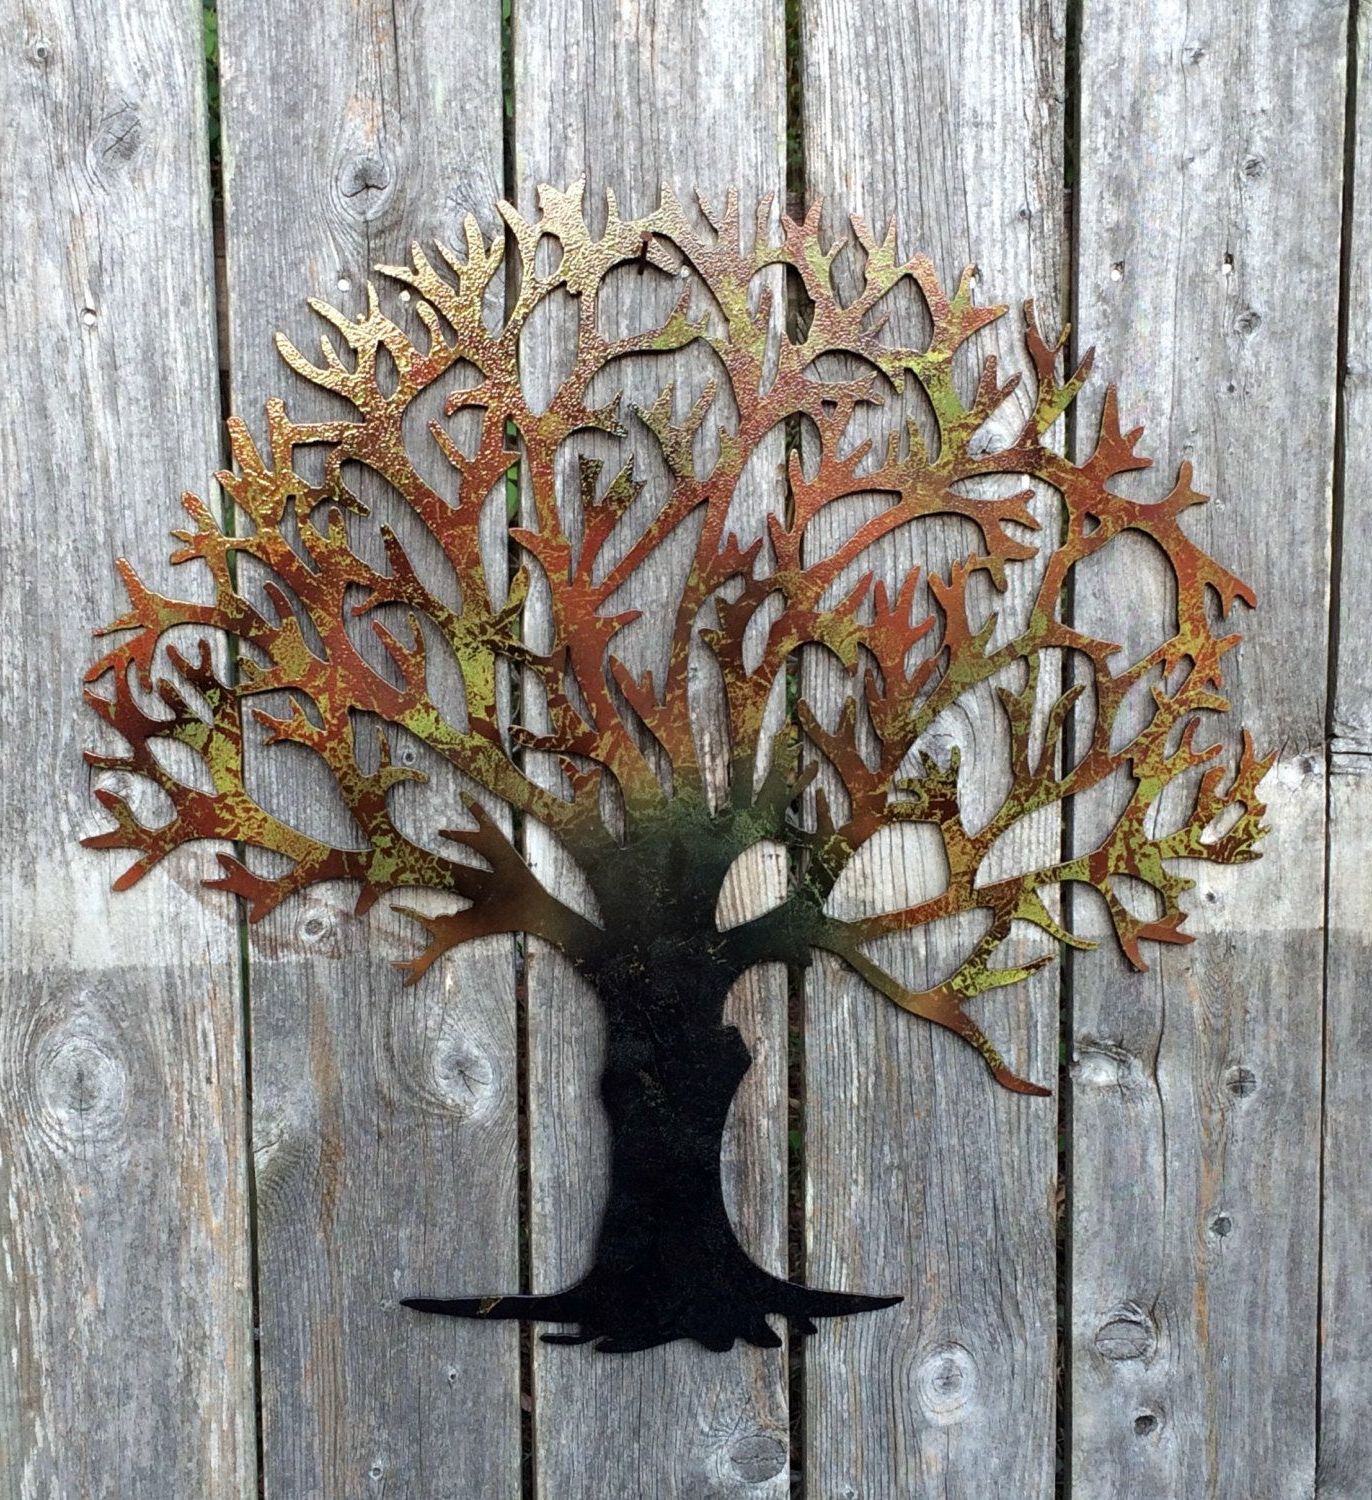 Newest Autumn Metal Wall Art Regarding Metal Tree Wall Art With Fall Colors/other Colors Available (View 3 of 15)